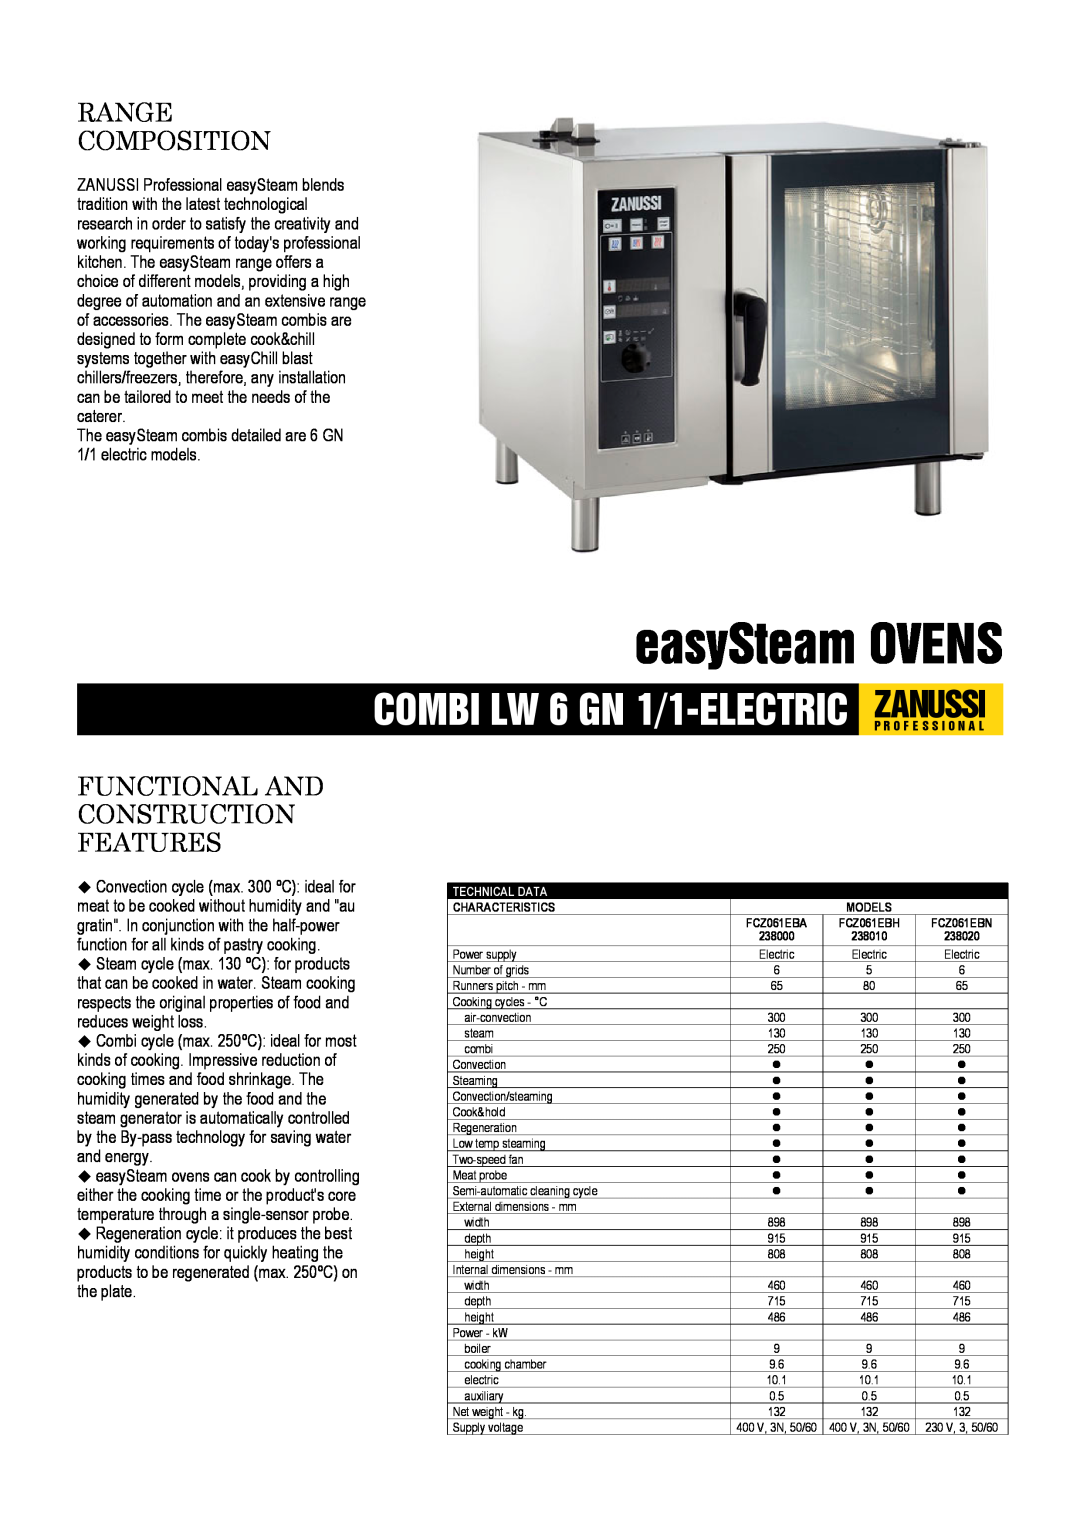 Zanussi FCZ061EBN, FCZ061EBH, FCZ061EBA dimensions easySteam OVENS, Range Composition, Functional And Construction Features 